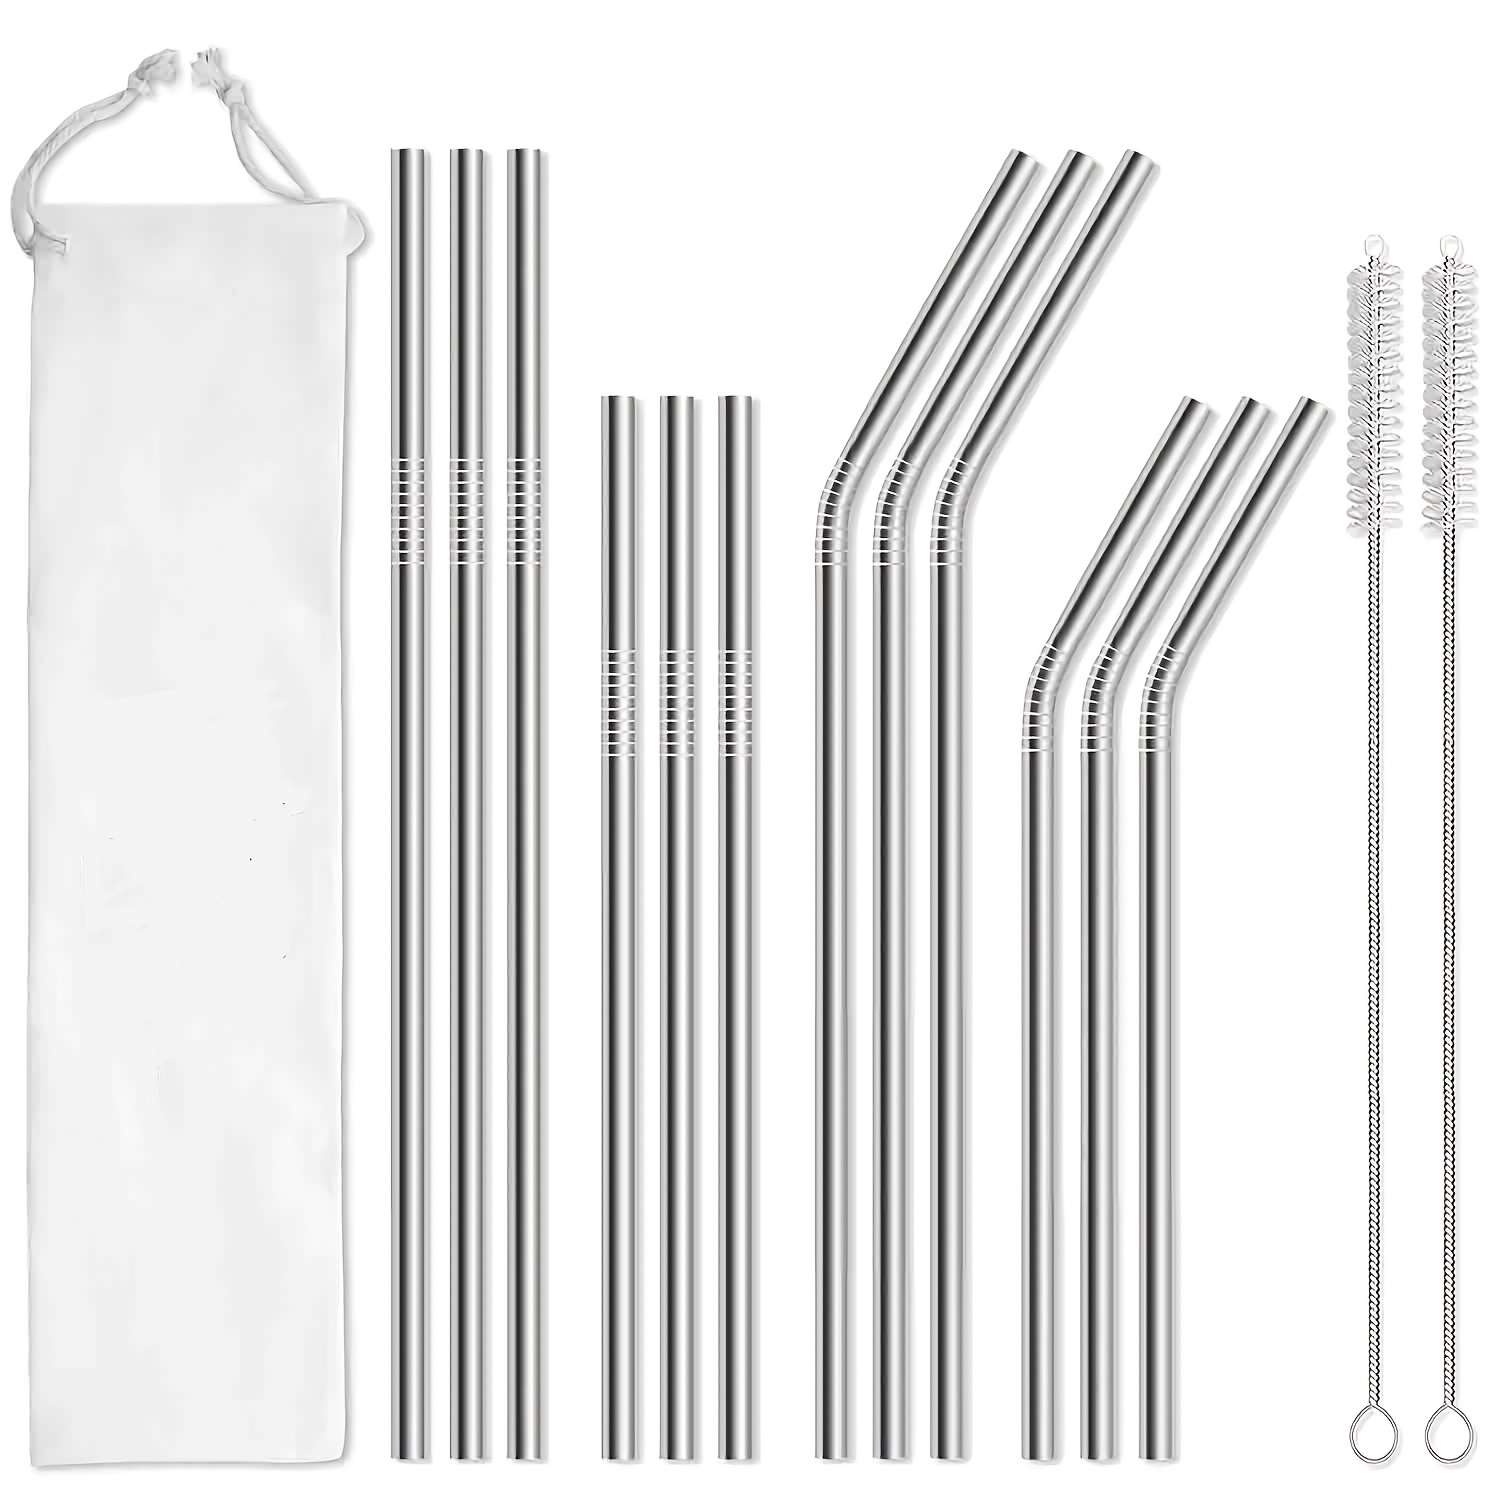 Teivio 8 Pack Short Stainless Steel Straws 6.25 inch and 6 inch Metal  Reusable Straws with Silicone Tips and Case, Cleaning Brush and Carry Bag  for